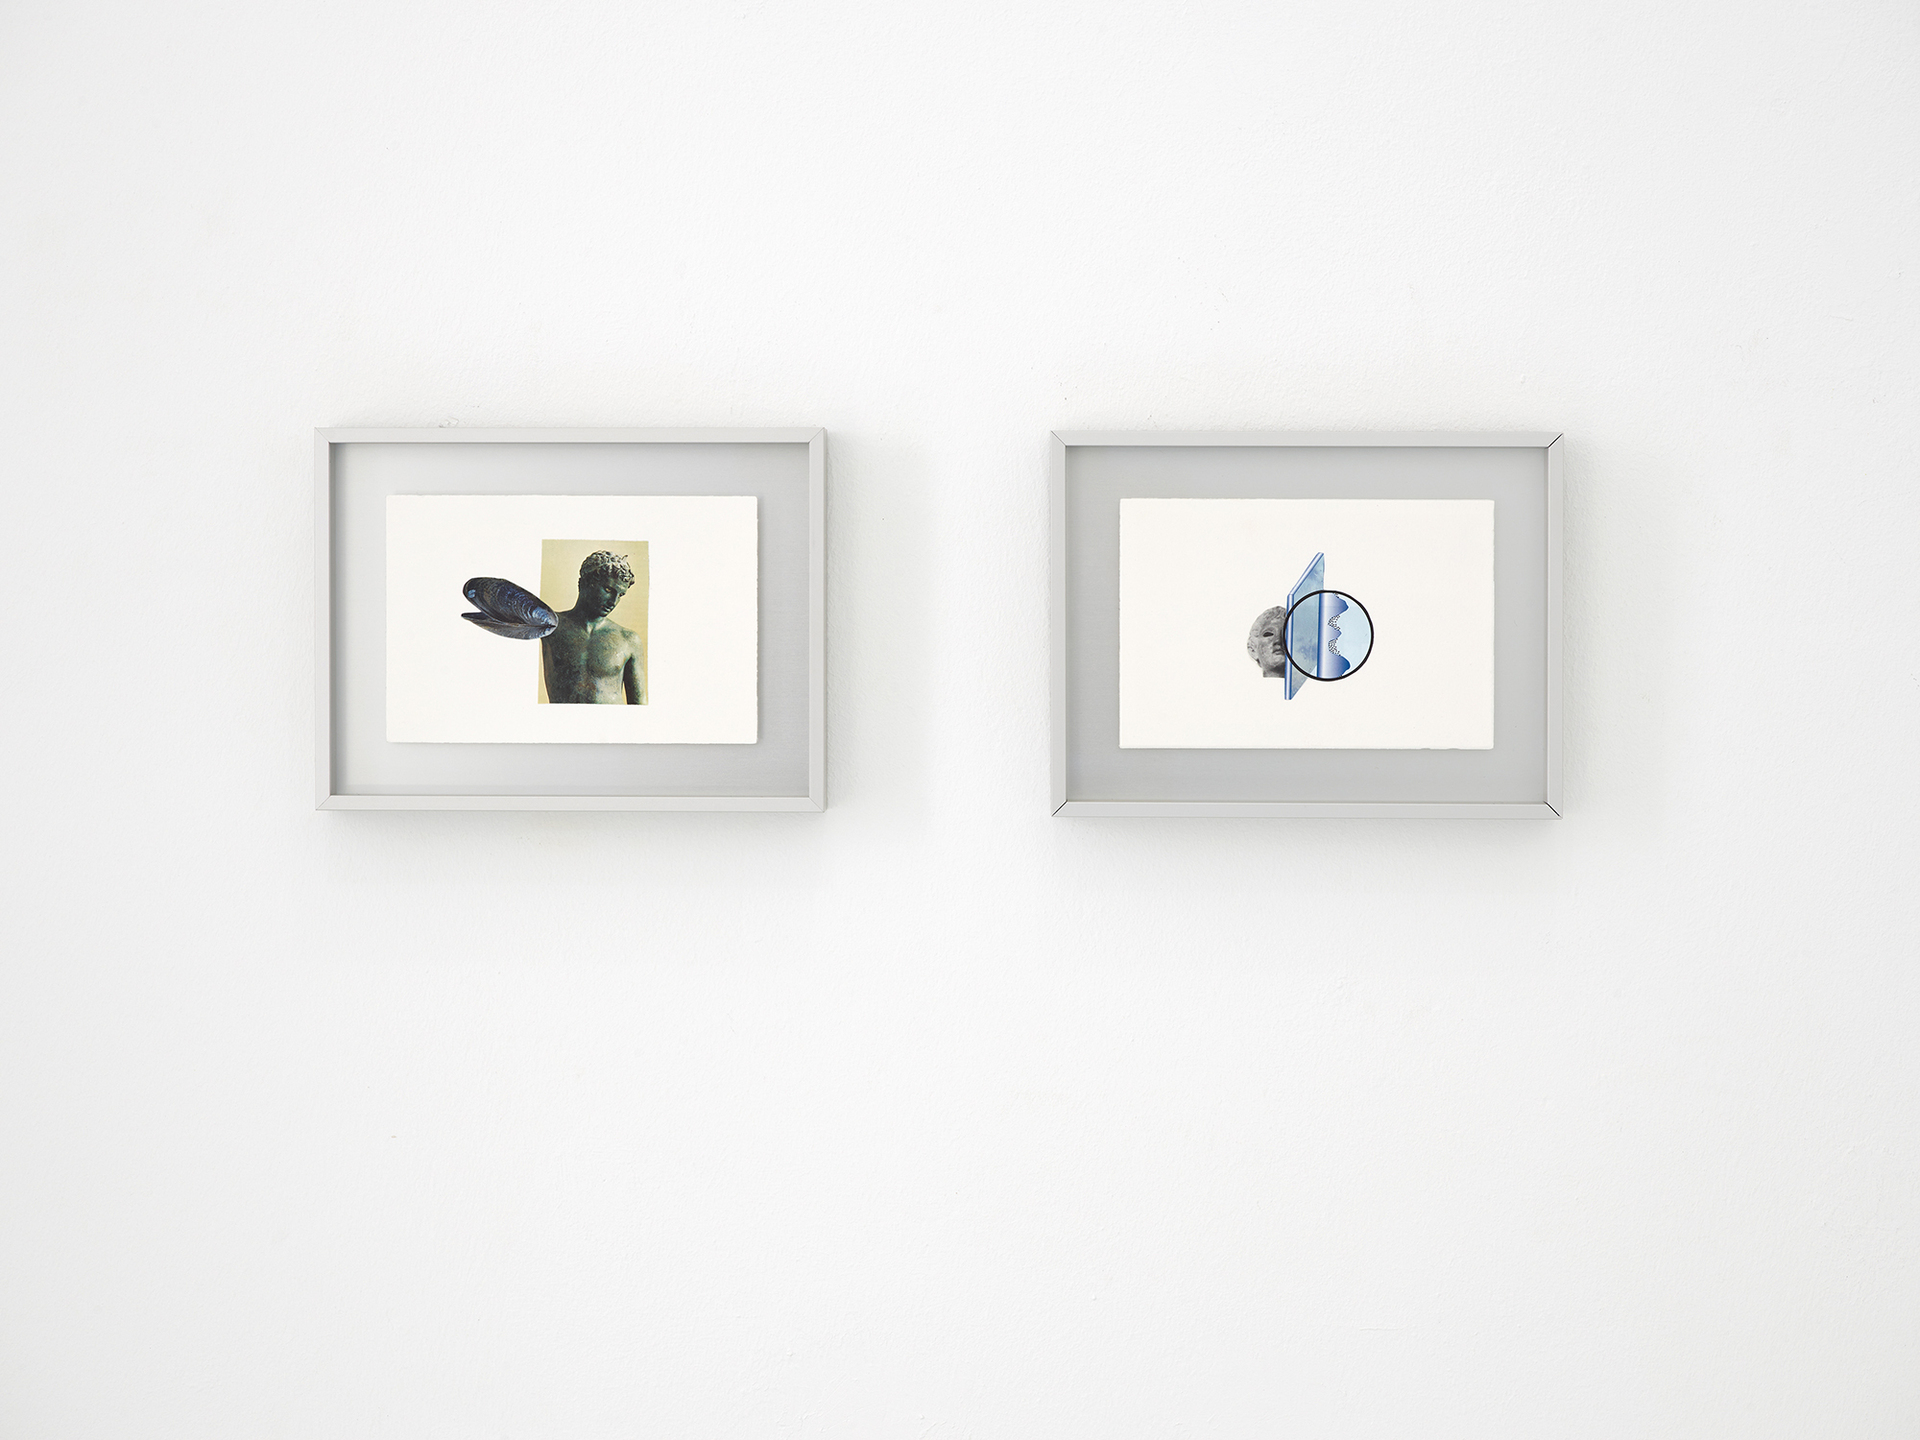 Christian Theiß, untitled, 2020, collages, framed, 15,5 x 20,5 cm each